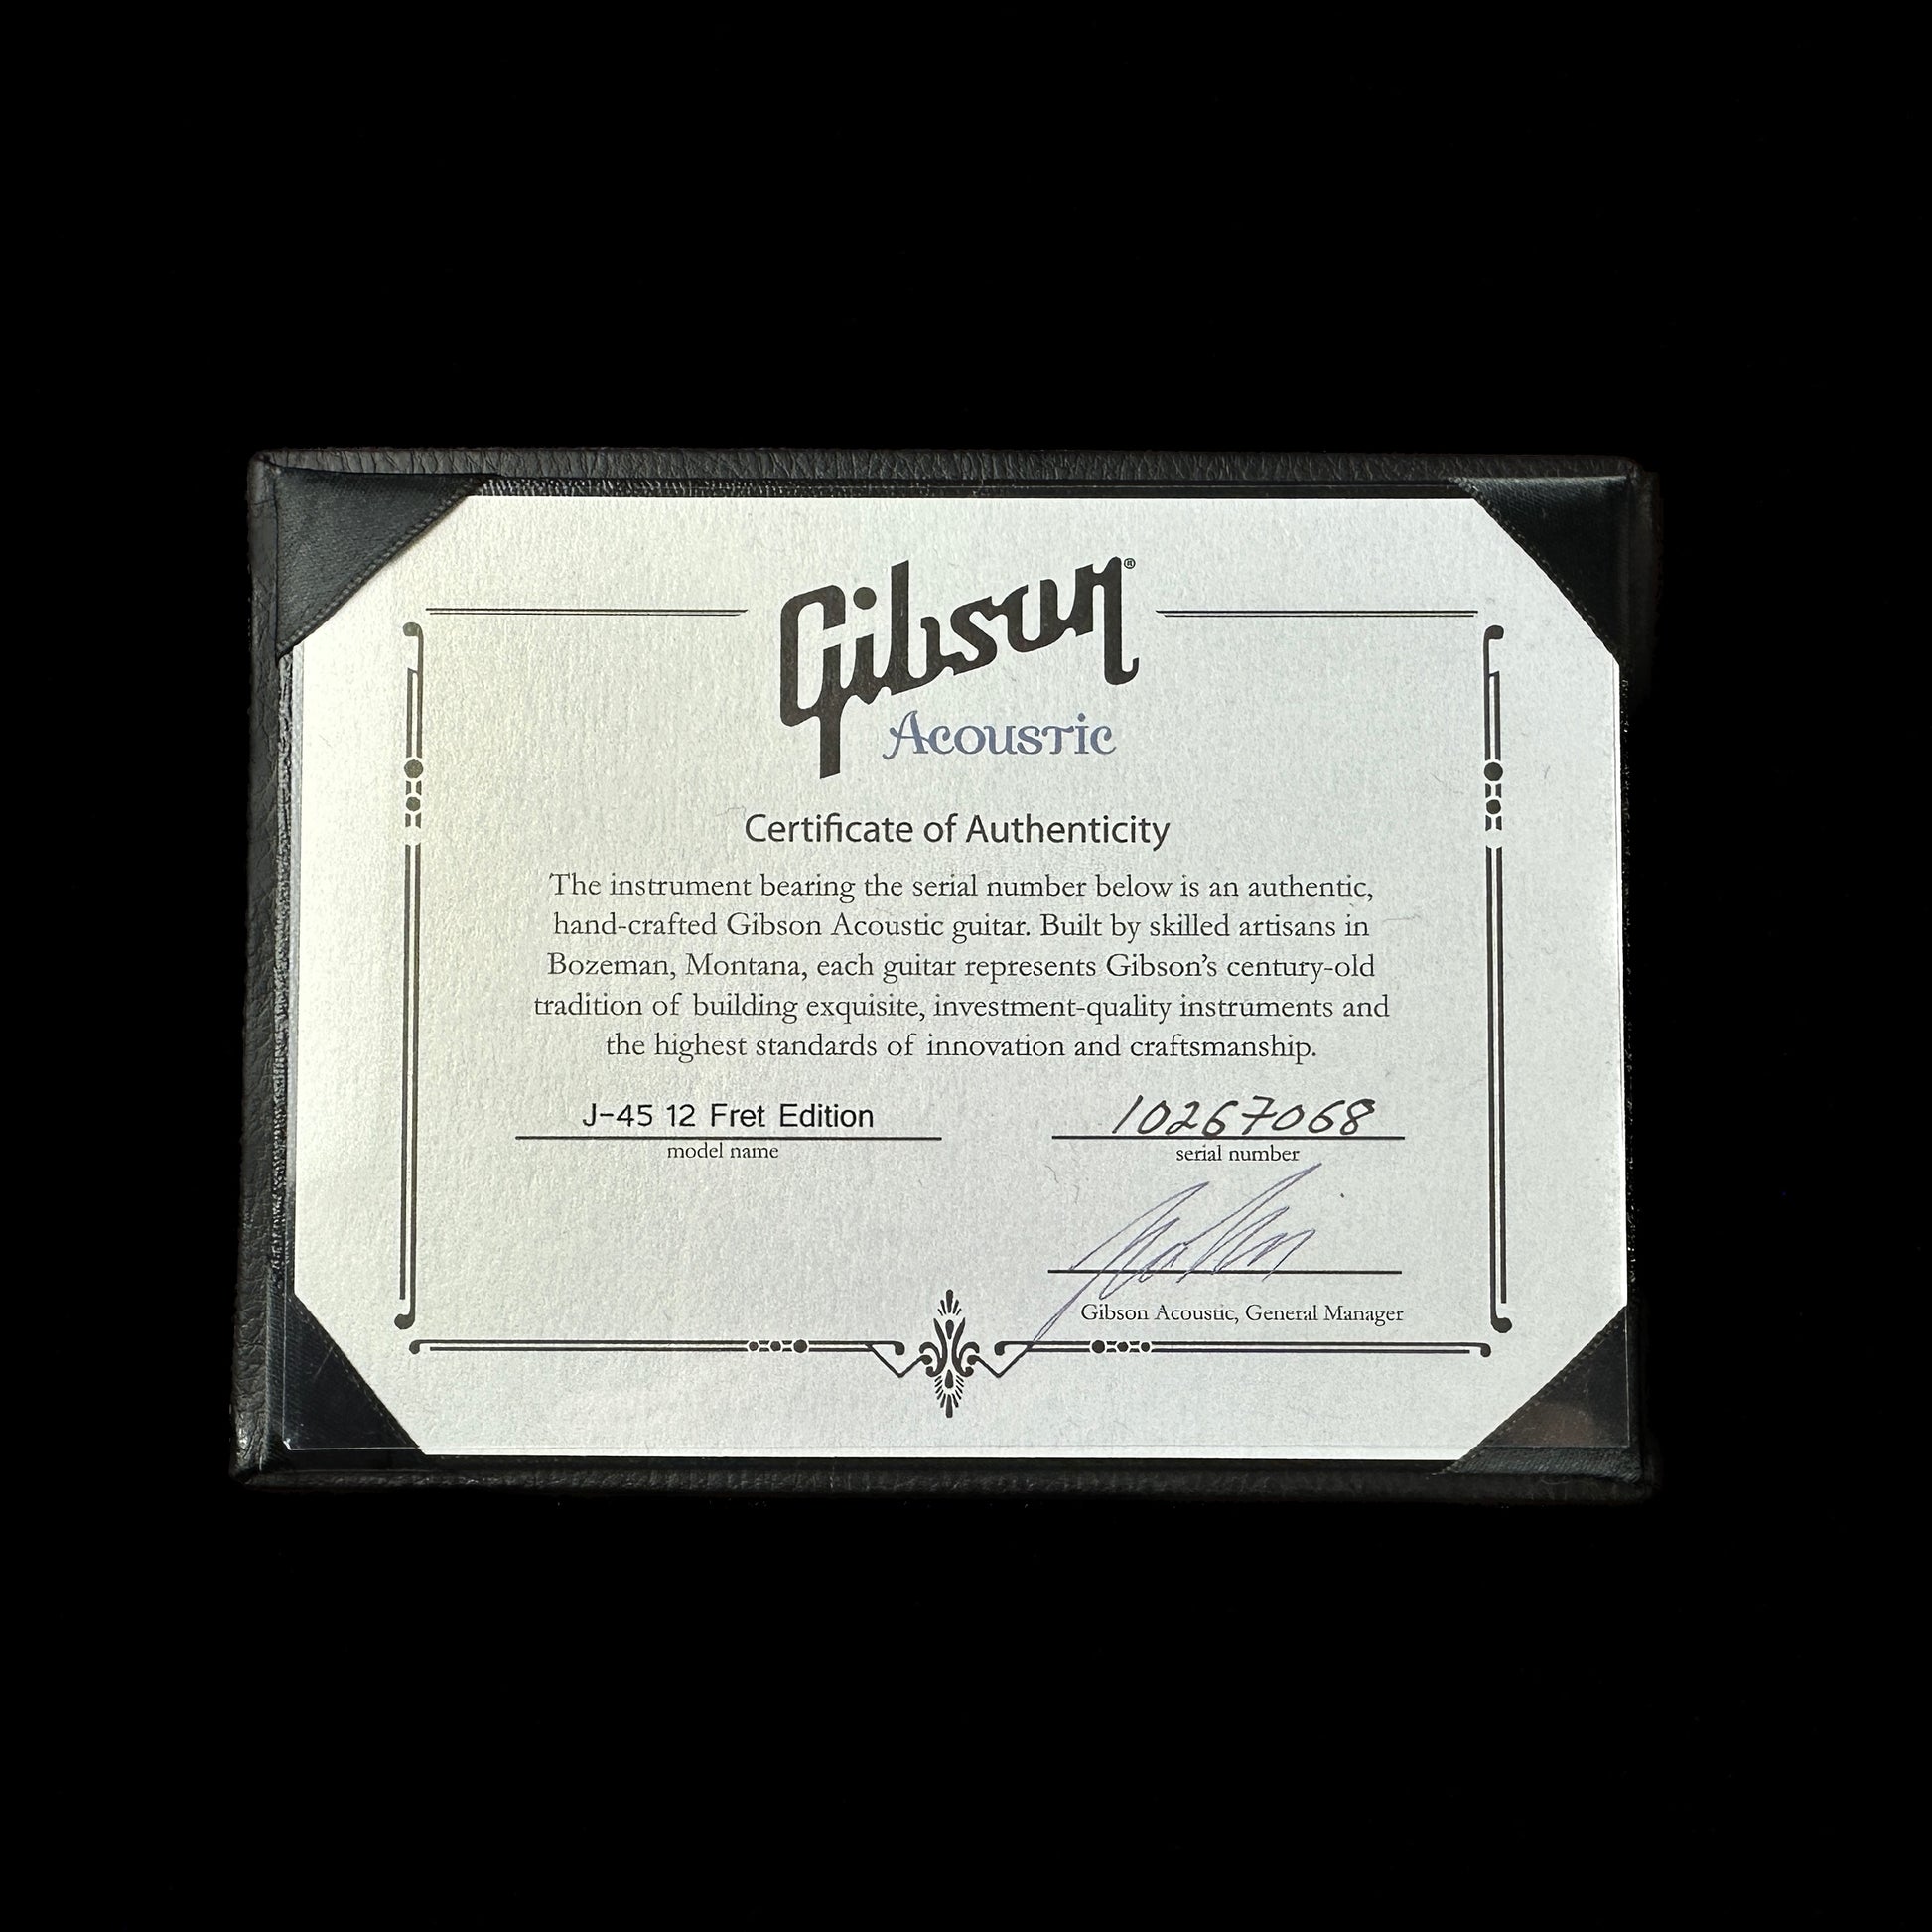 Certificate of authenticity for Used Gibson J-45 12 Fret Edition Burst.